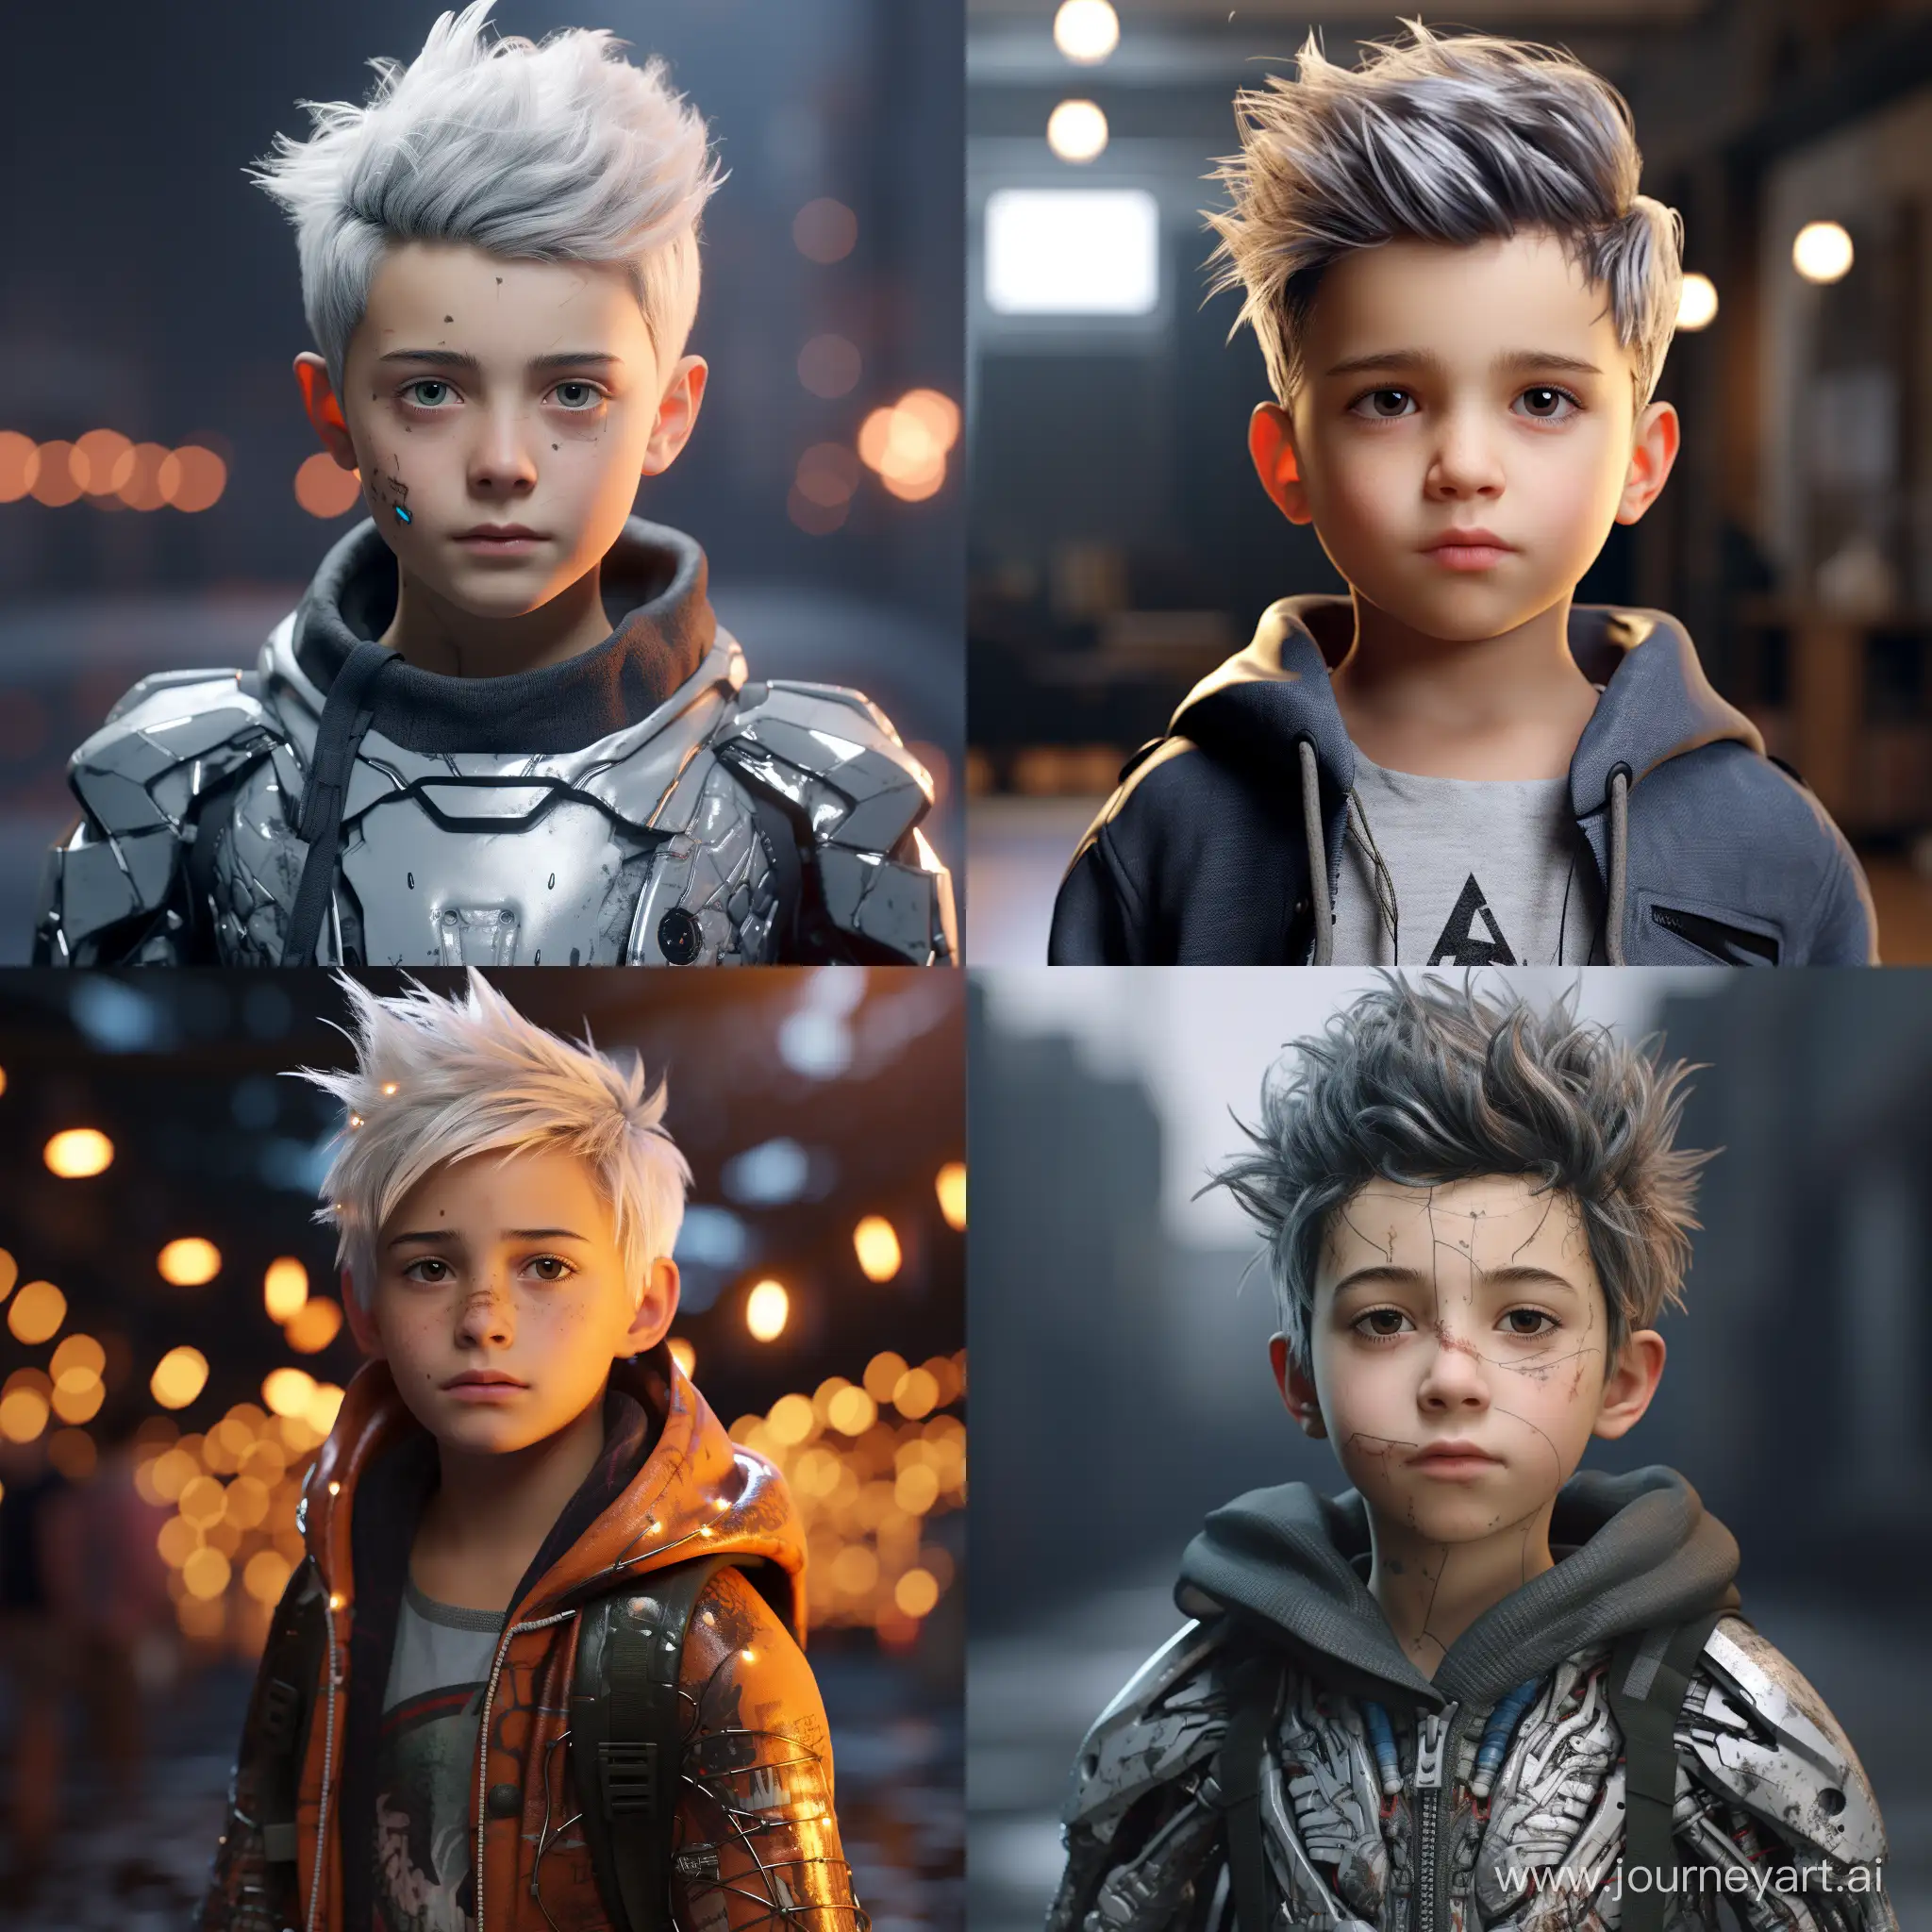 Realistic-AI-Robot-Boy-in-4K-and-8K-Resolution